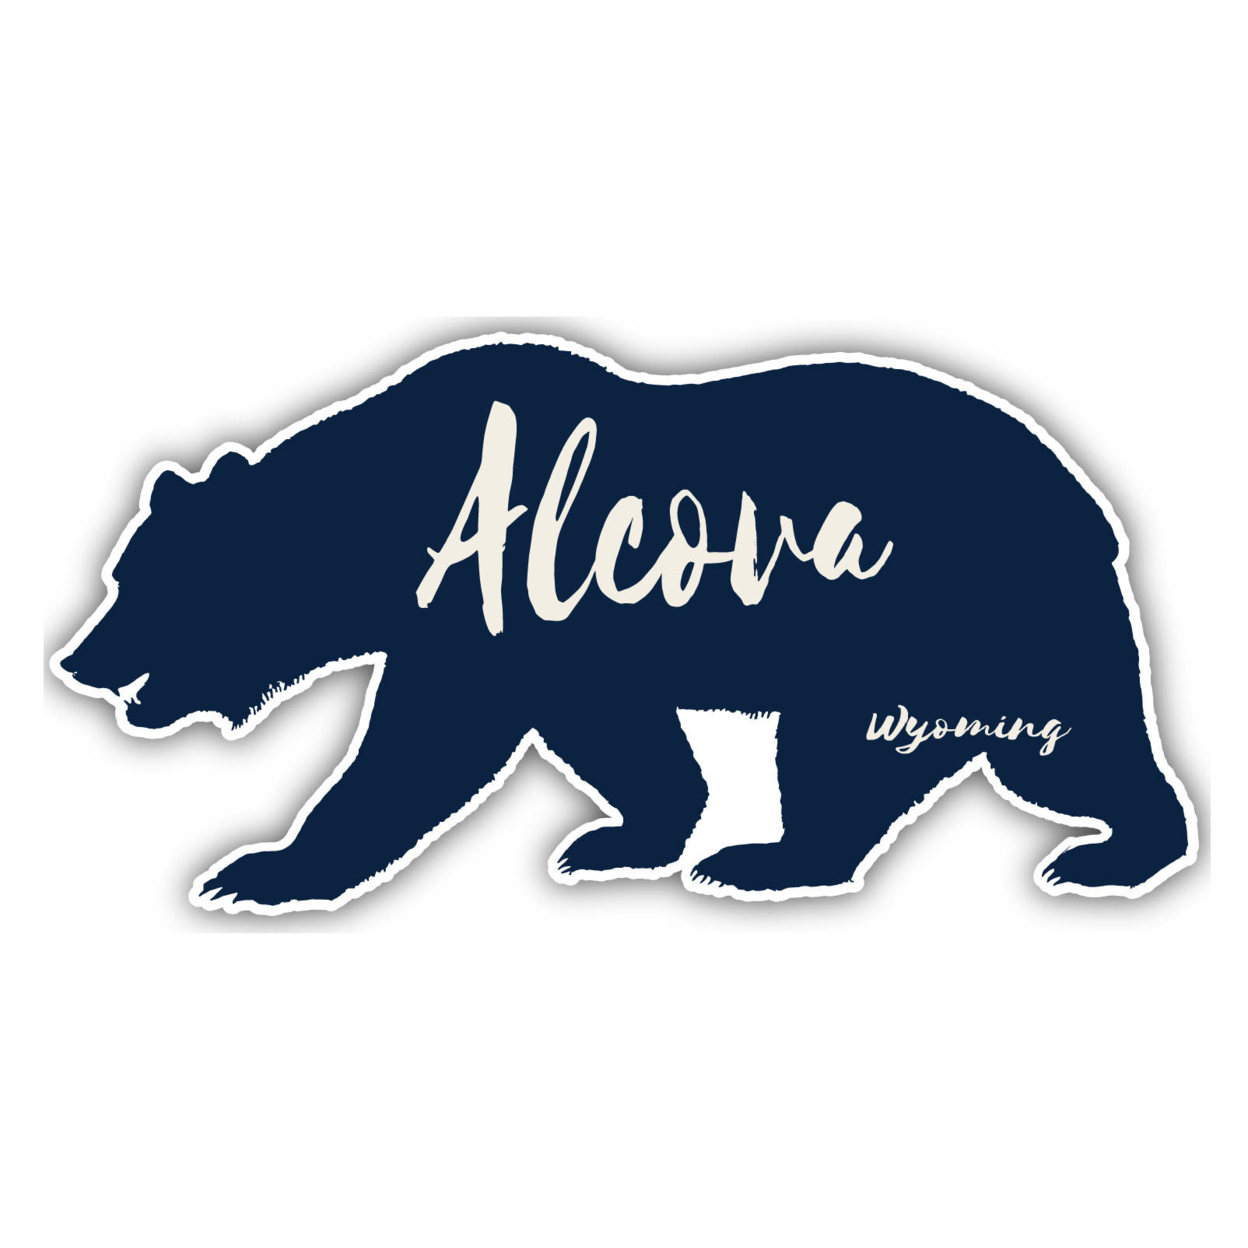 Alcova Wyoming Souvenir Decorative Stickers (Choose Theme And Size) - 4-Pack, 4-Inch, Camp Life